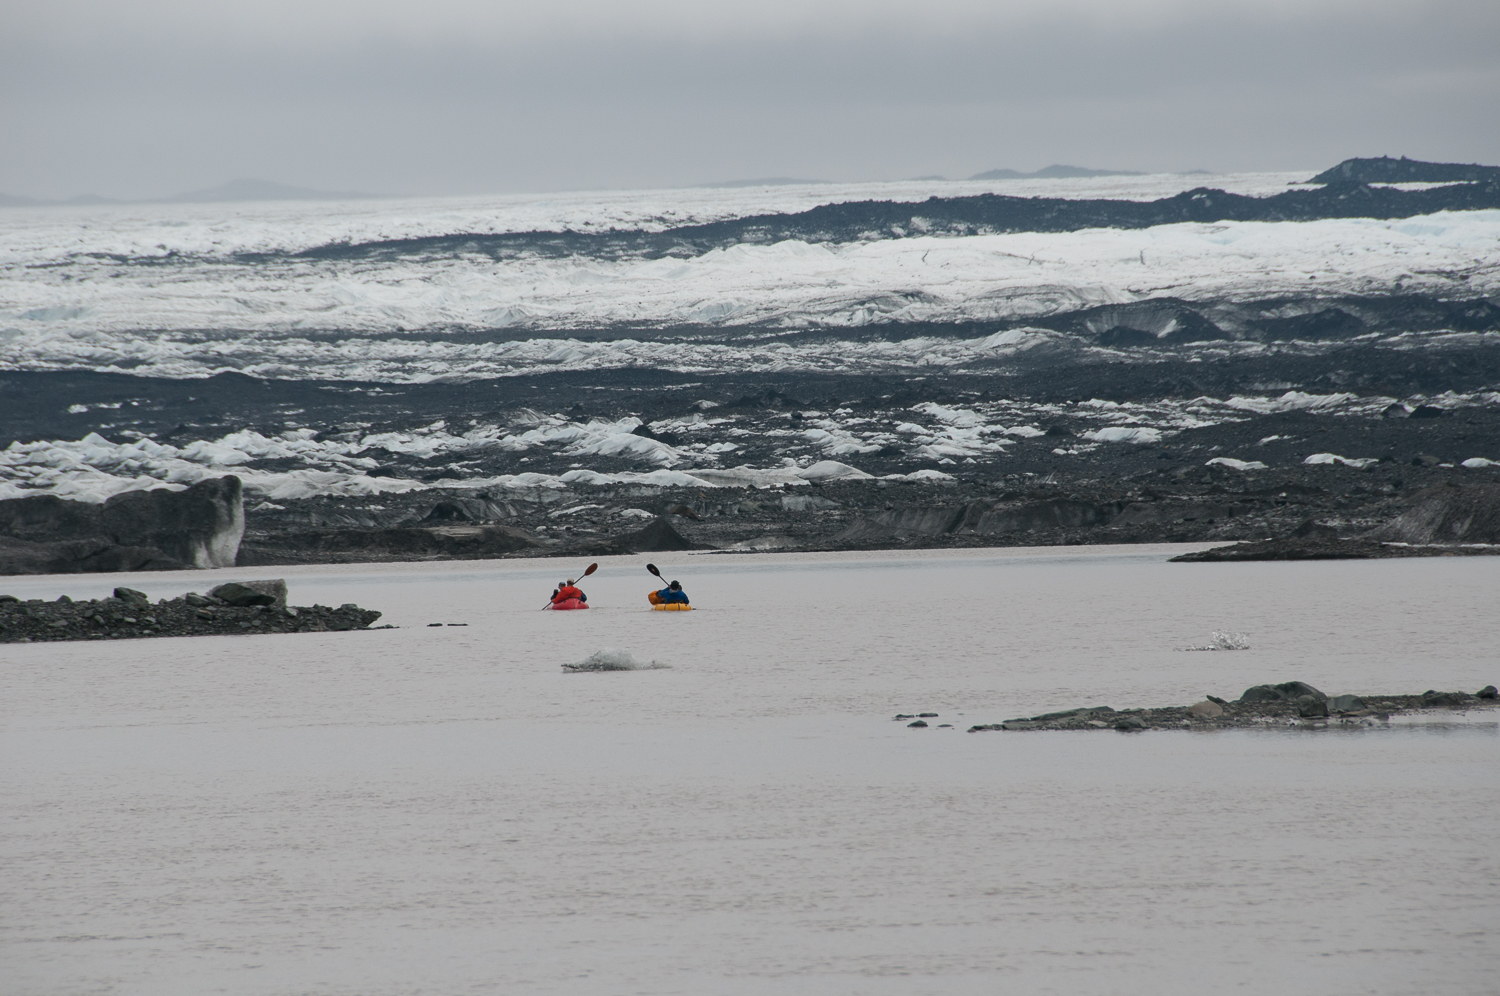 Using Packrafts to Ferry Gear Across Lagoon to Malaspina Glacier